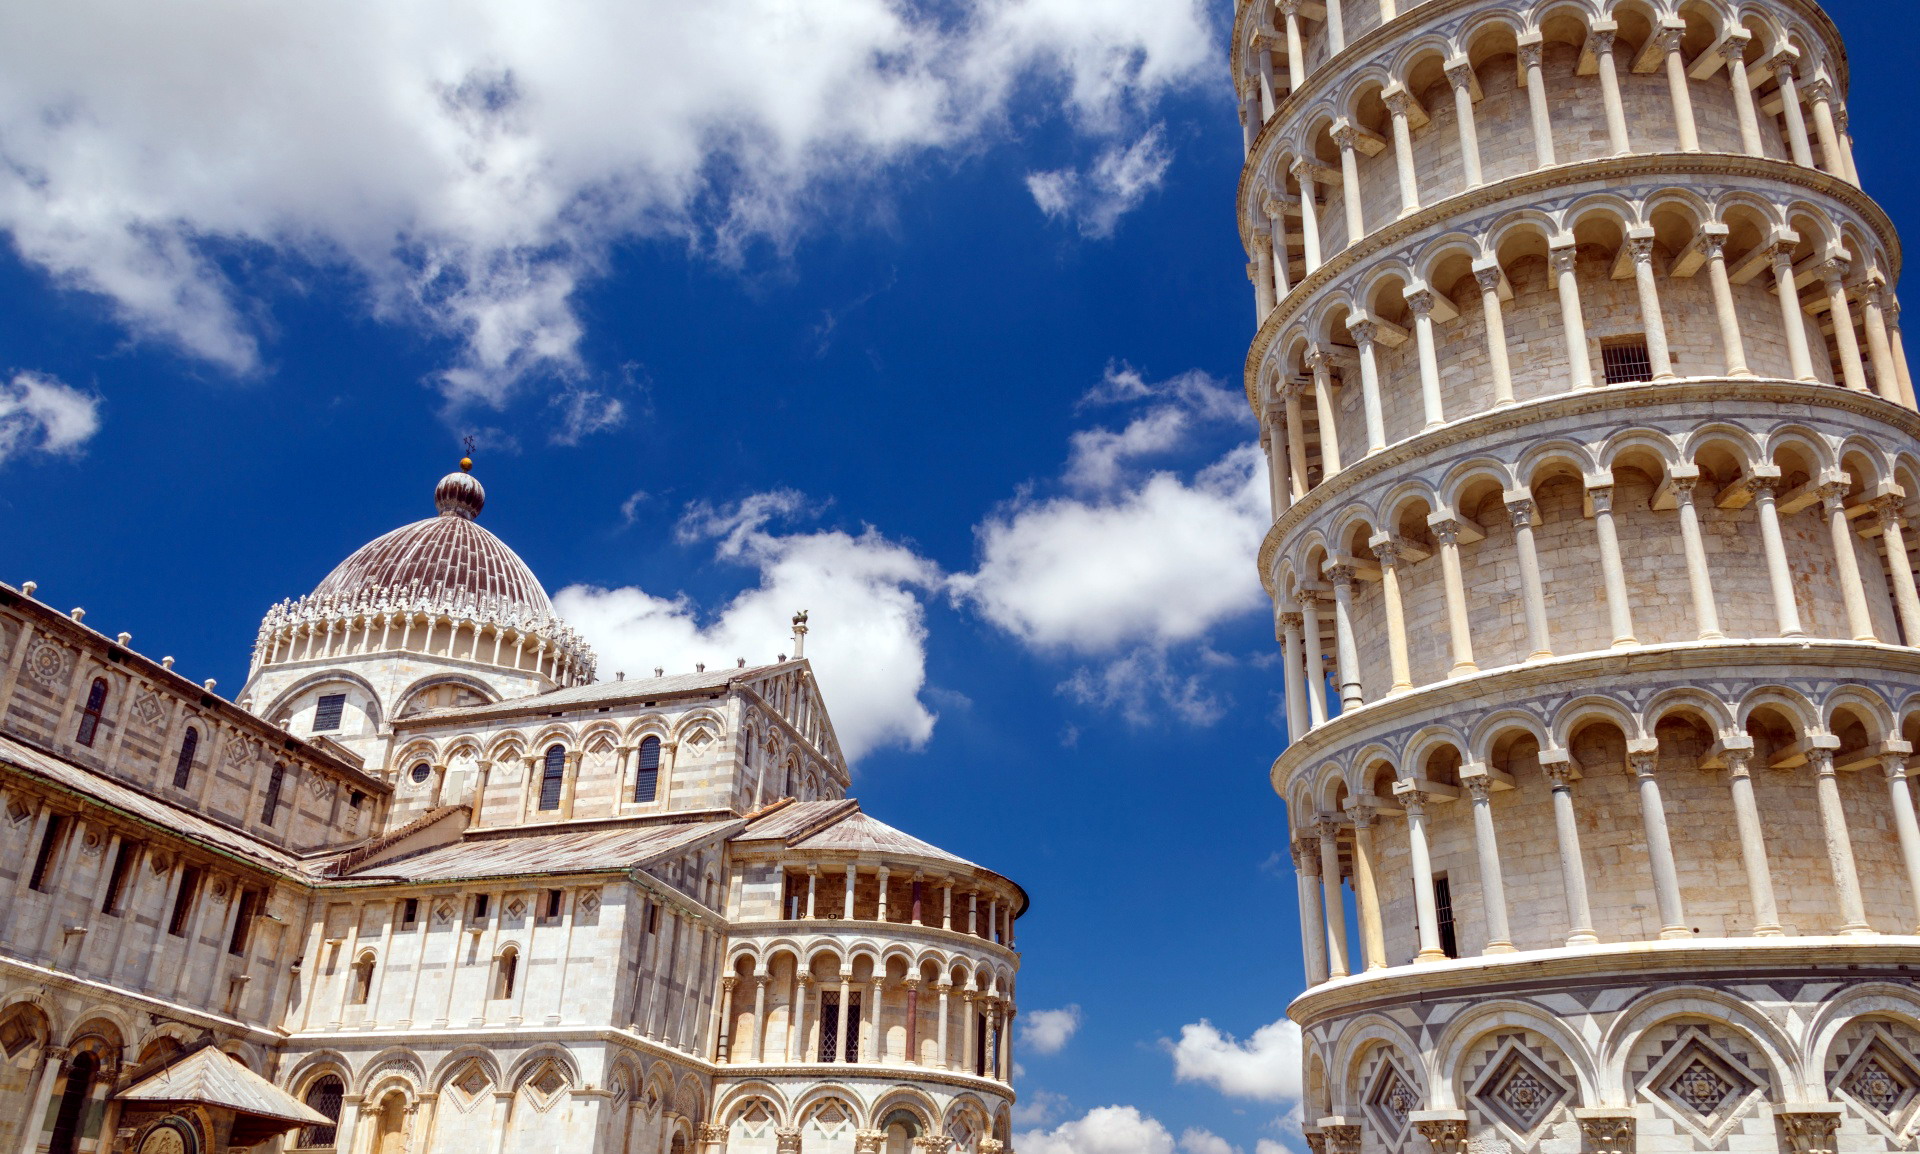 Man Made Leaning Tower Of Pisa HD Wallpaper